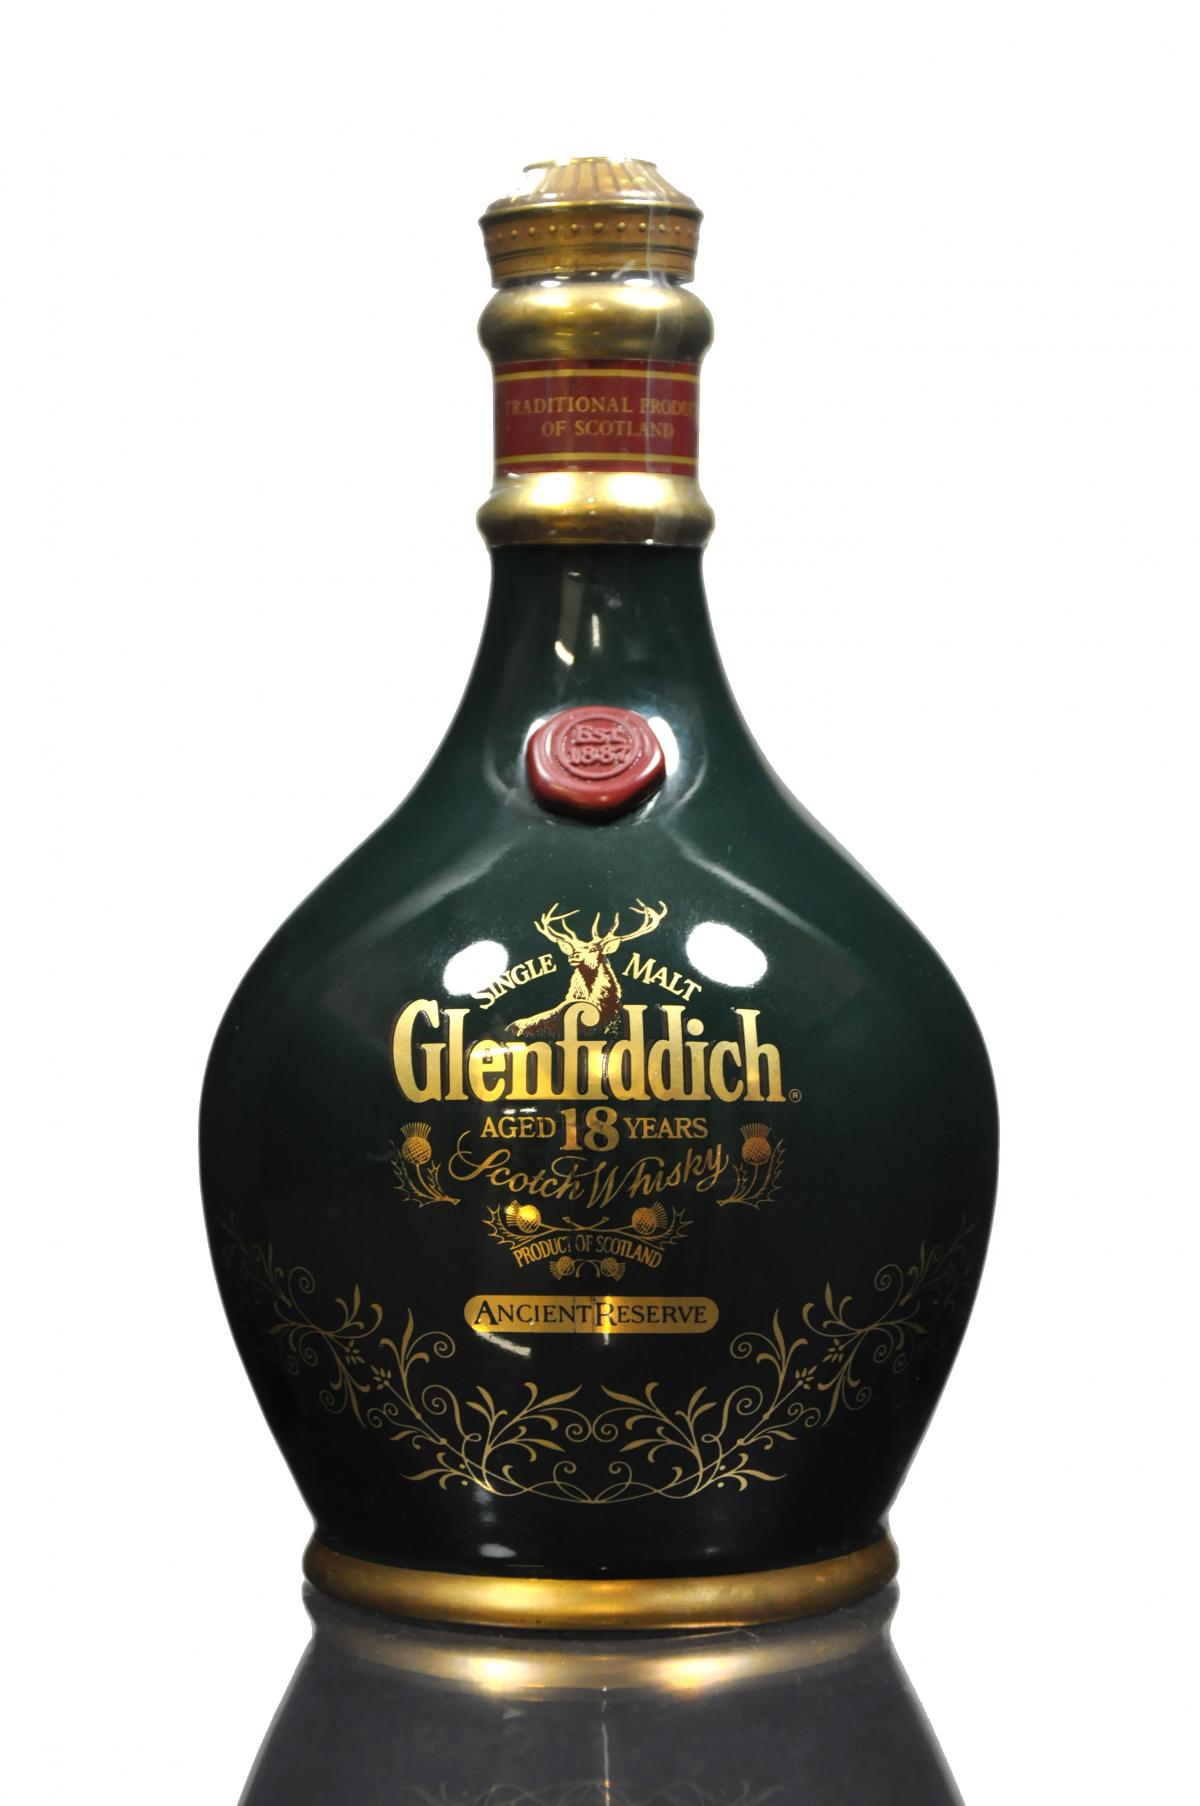 Glenfiddich 18 Year Old - Ancient Reserve Ceramic - 1990s